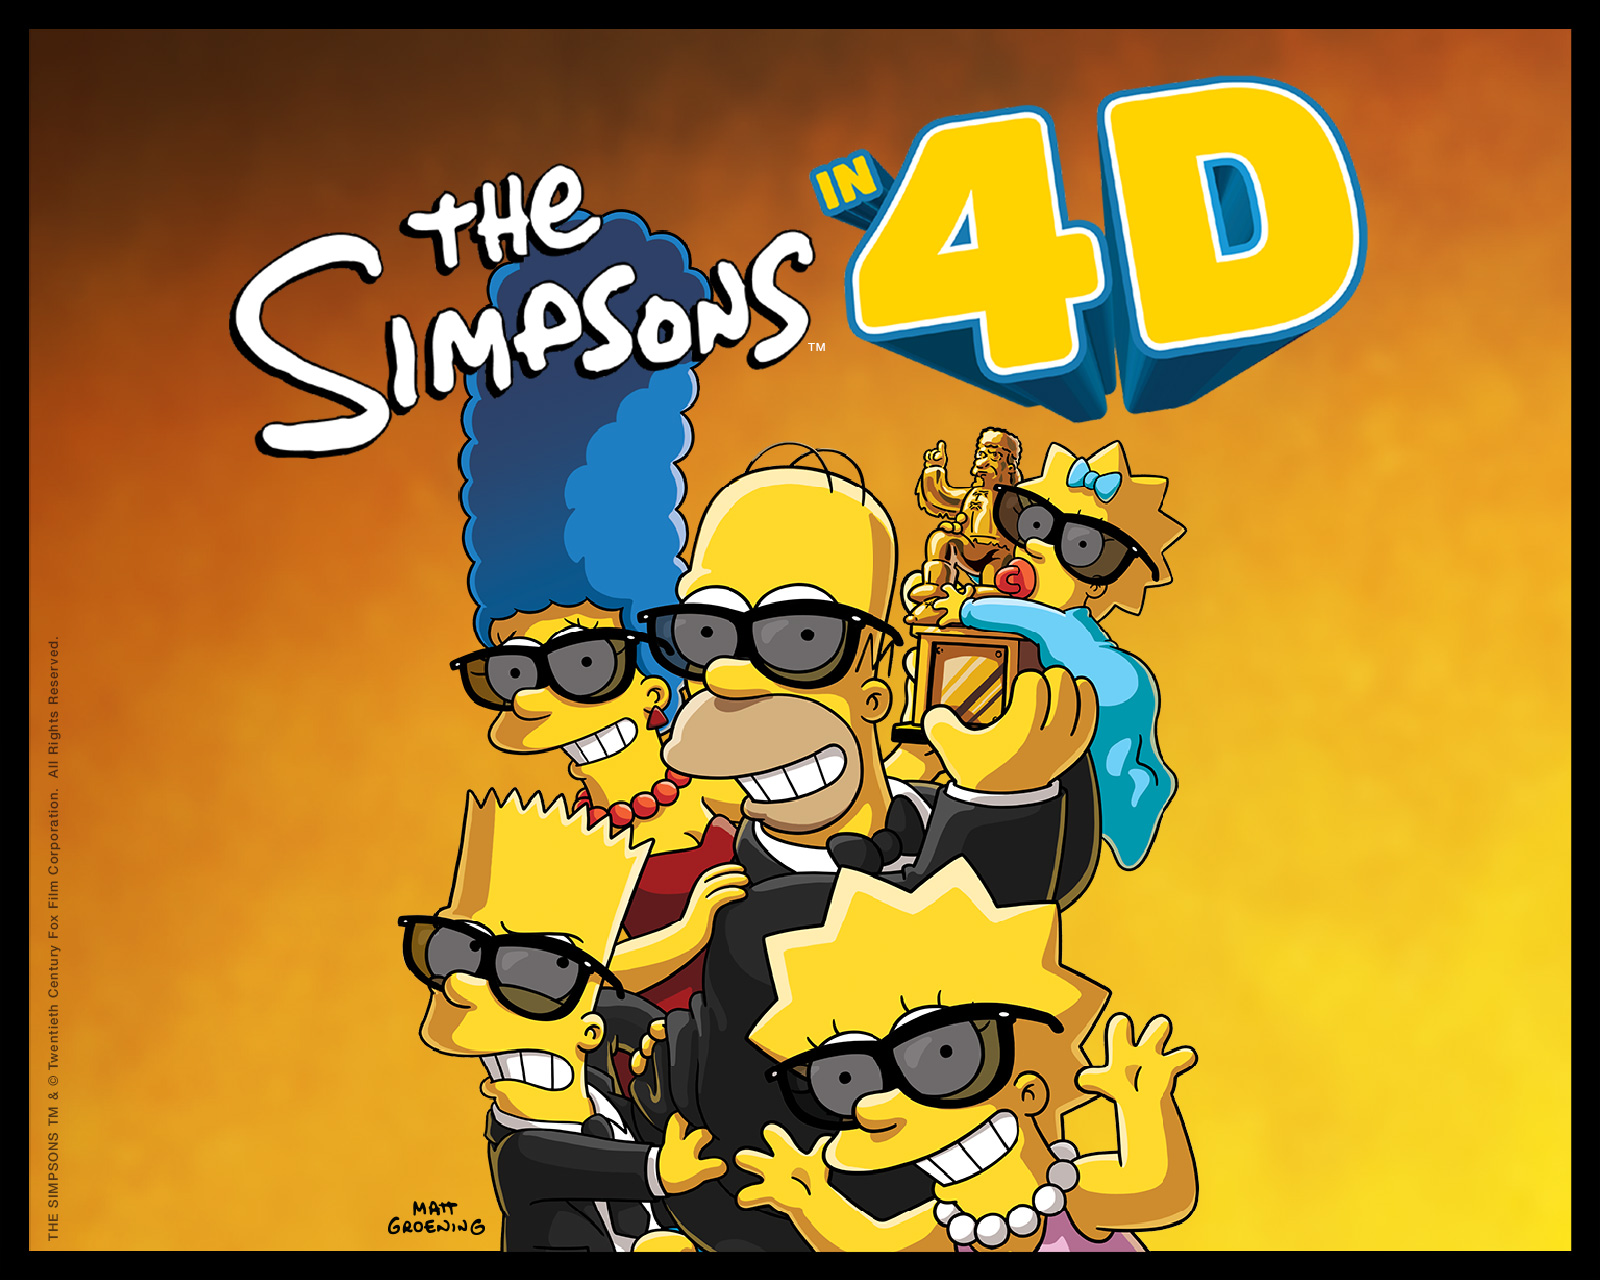 the simpsons in 4d thumbnail